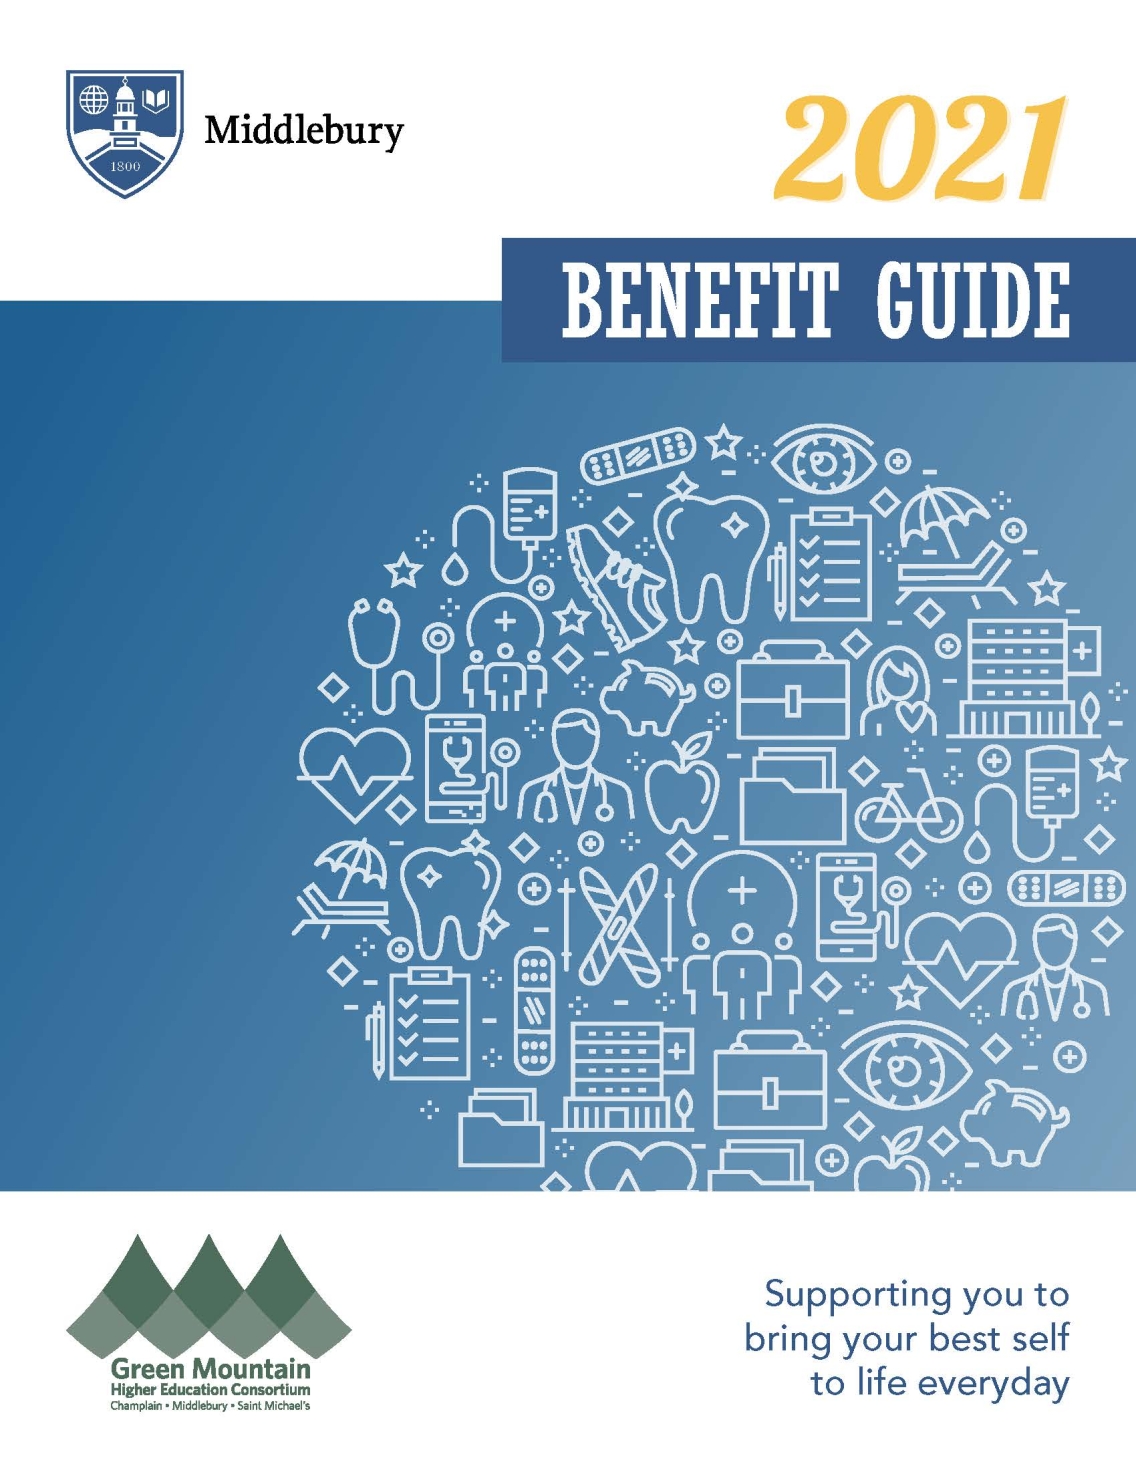 Cover image of the 2021 Middlebury Benefit Guide for employees.